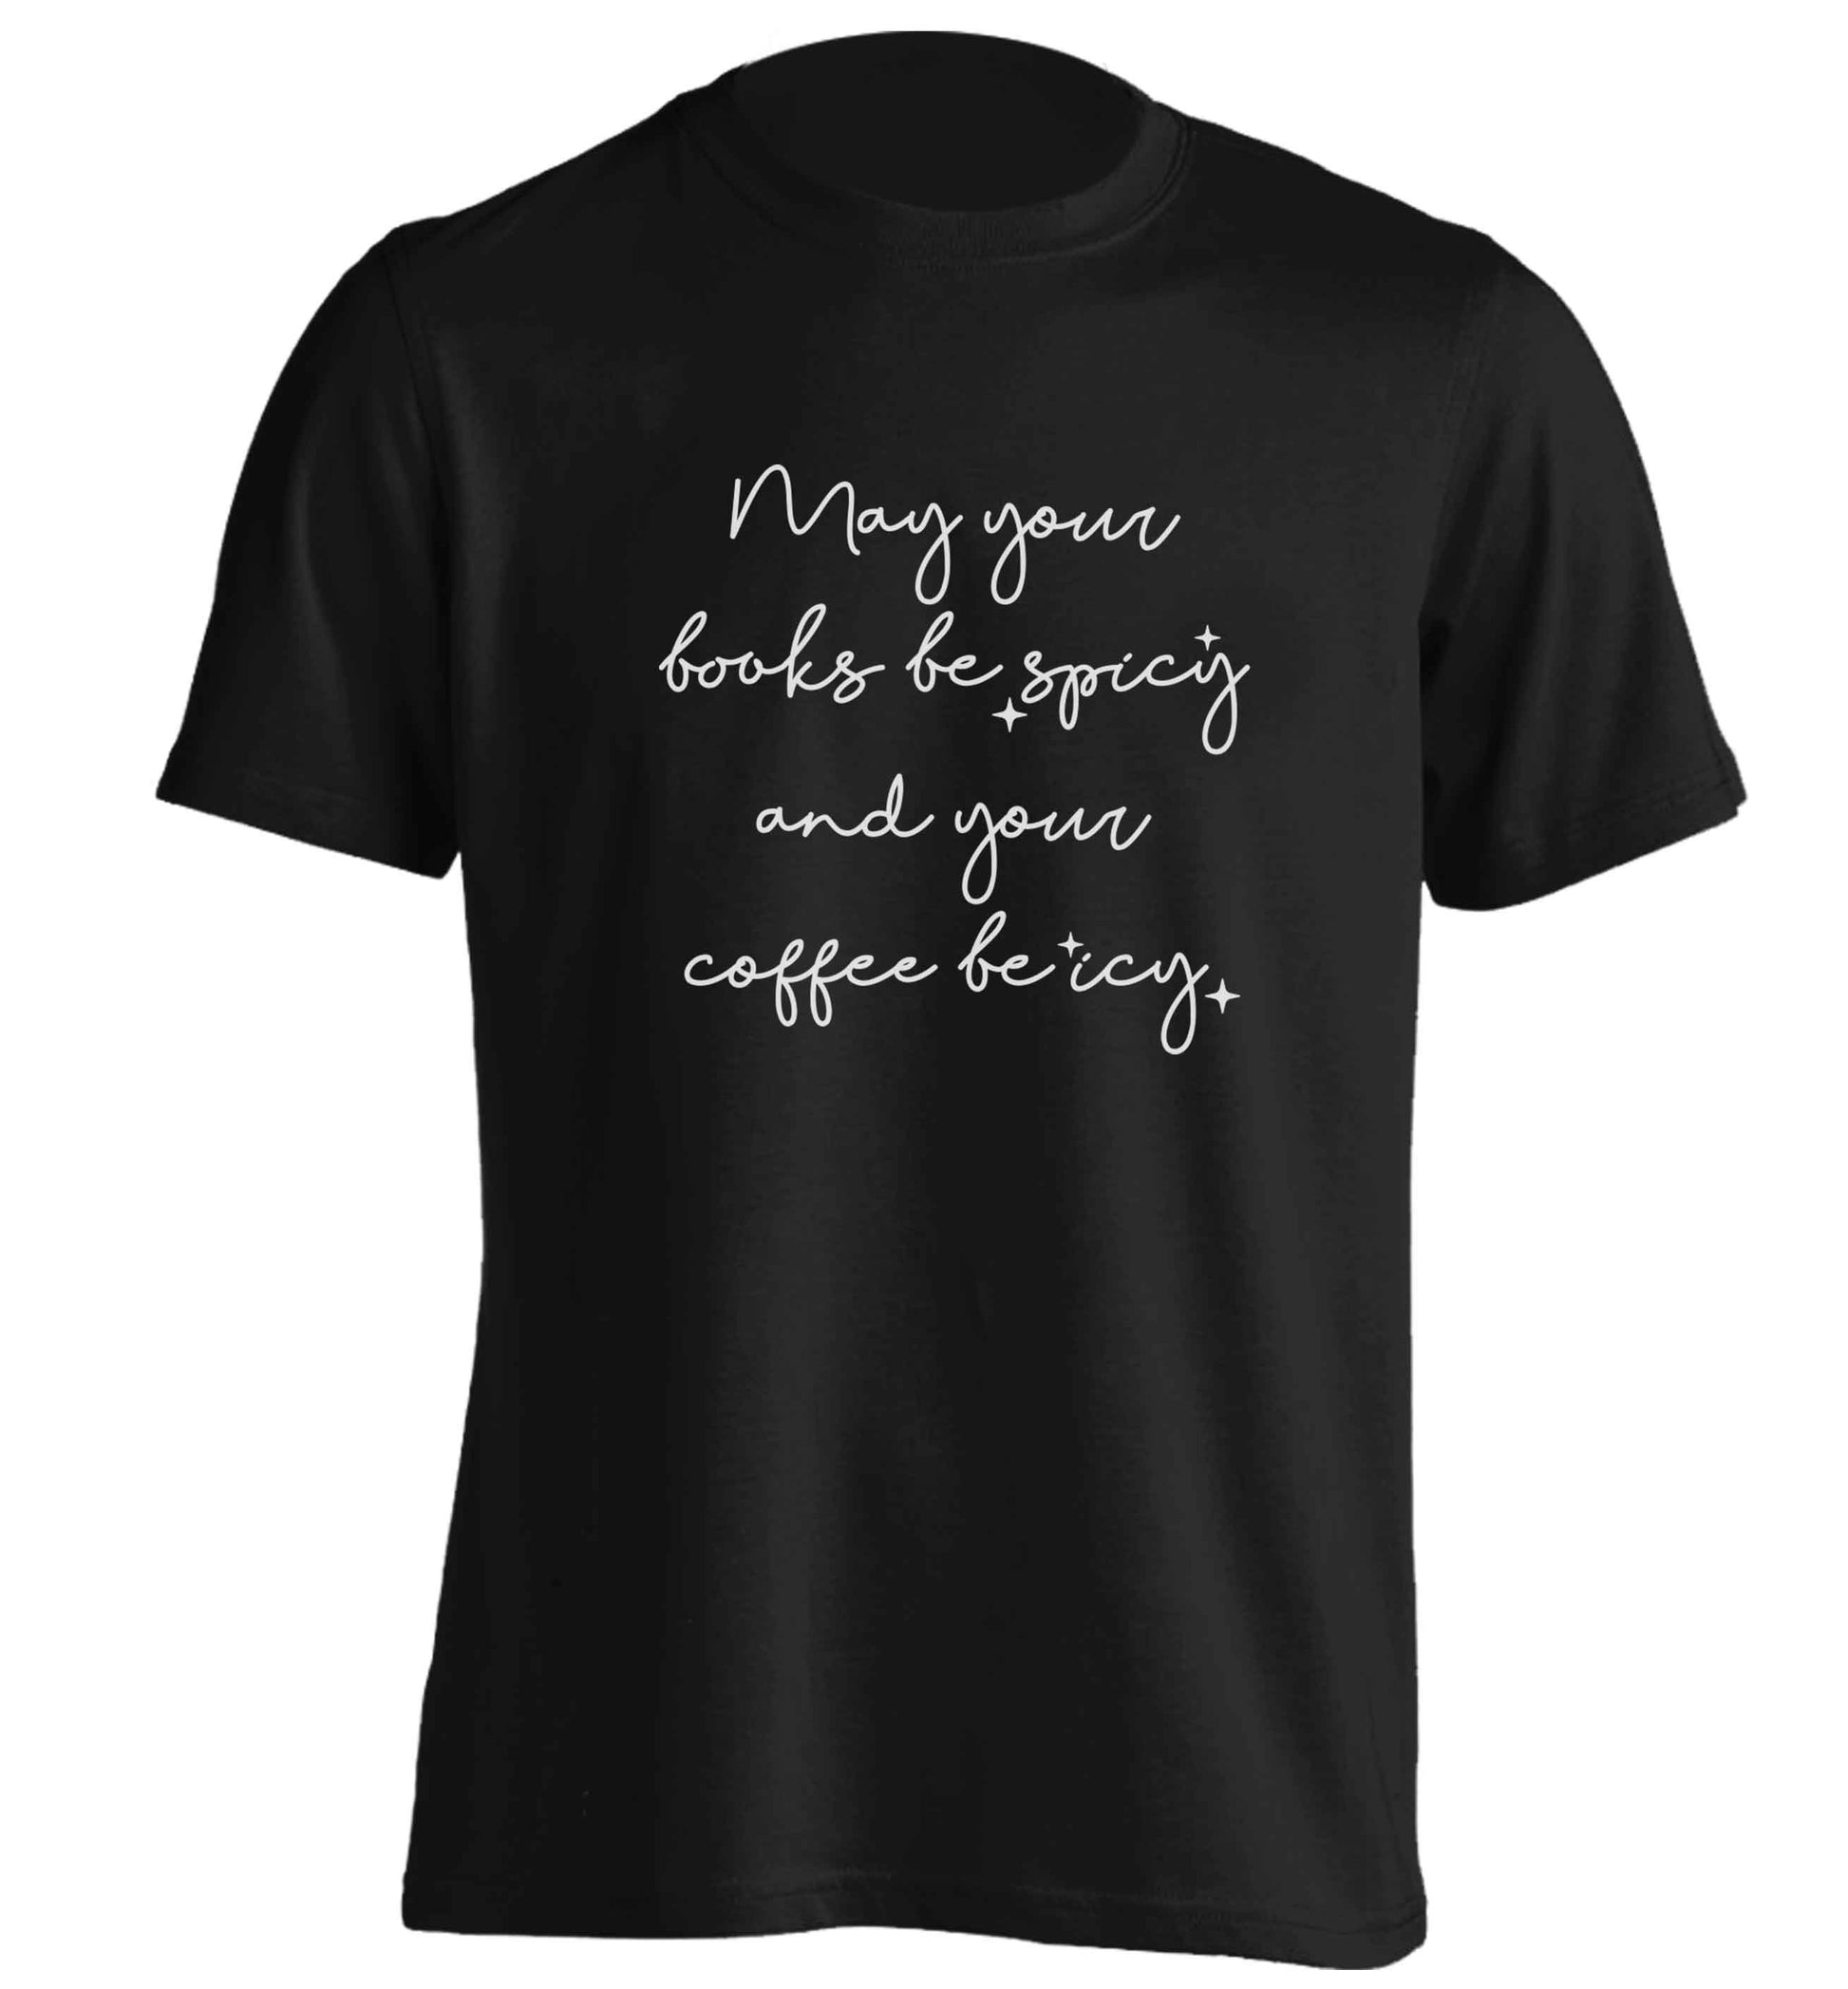 May your books be spicy and your coffee be icy adults unisex black Tshirt 2XL